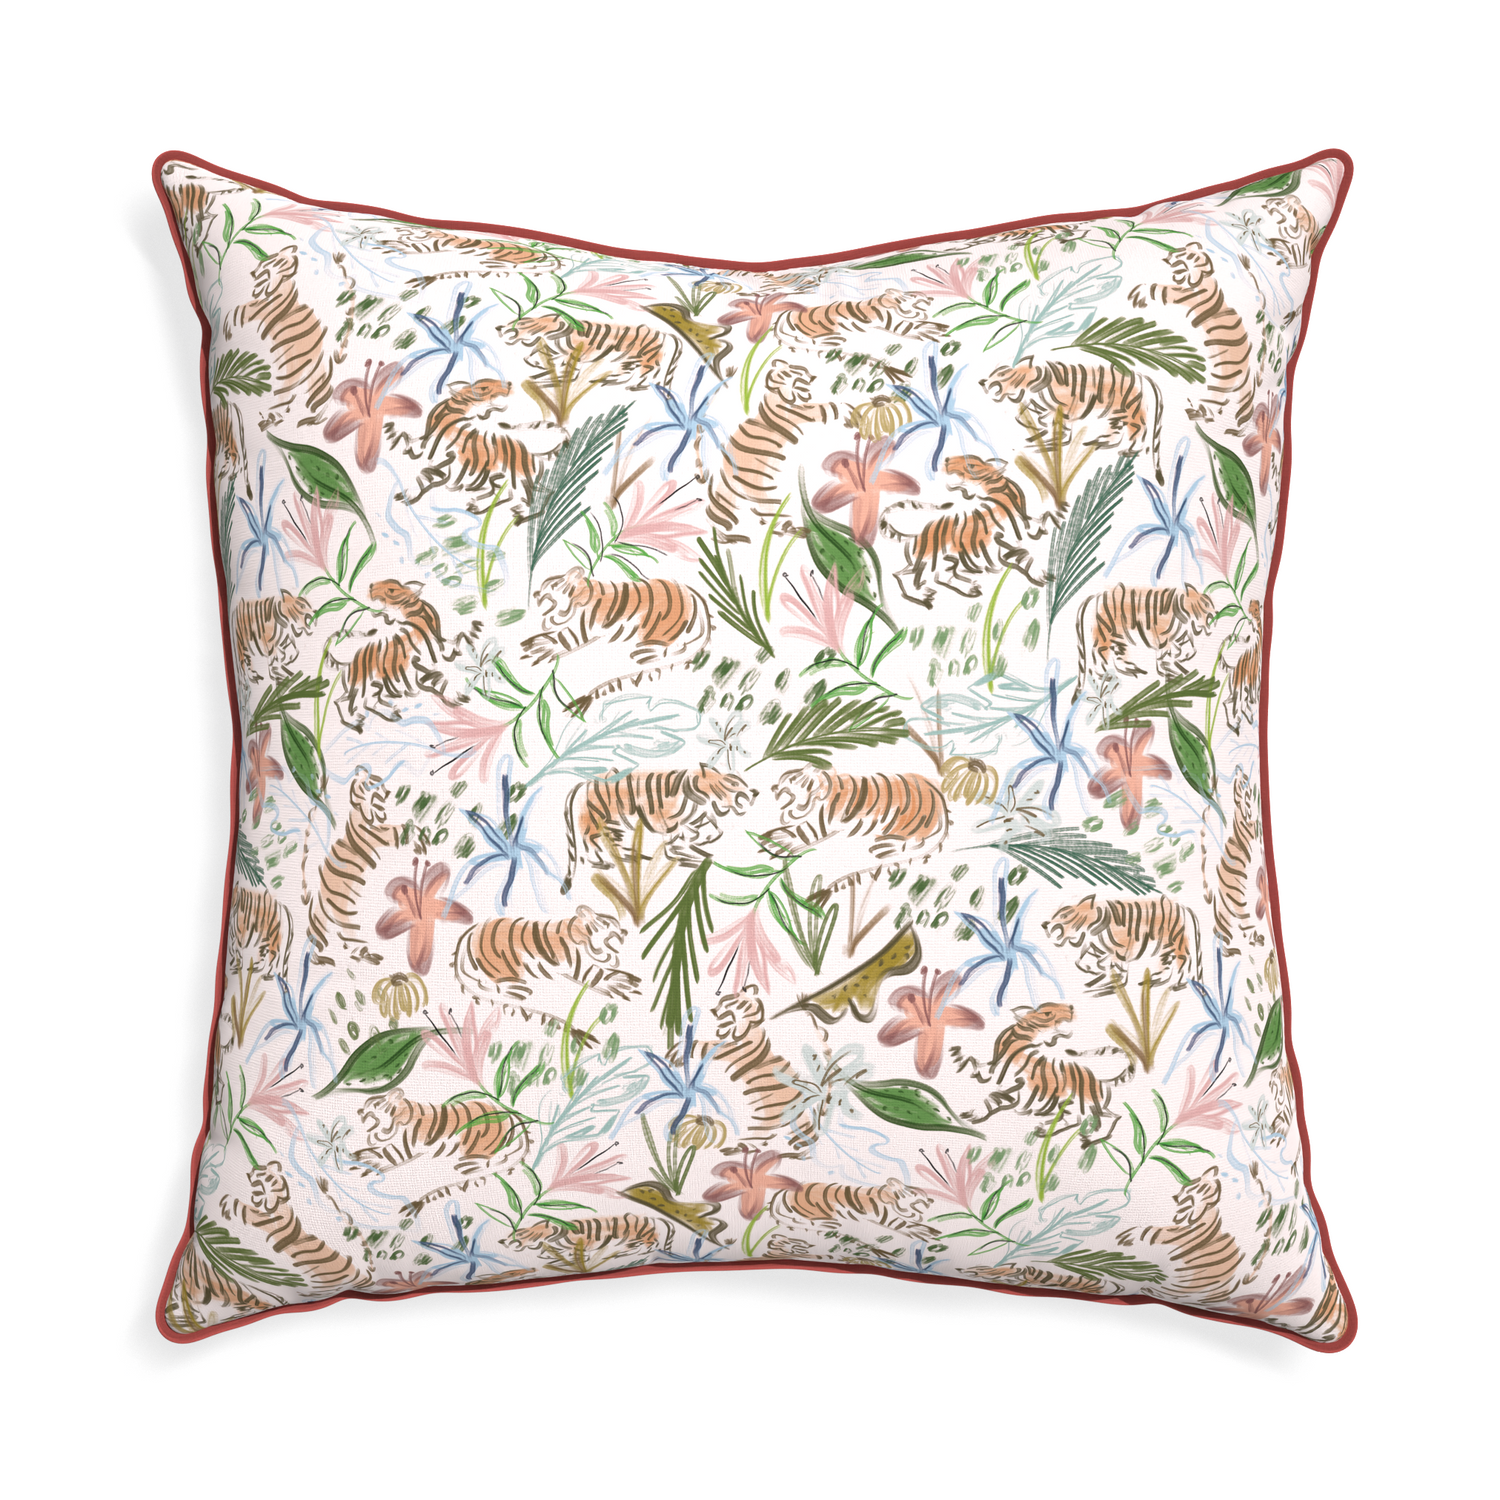 Euro-sham frida pink custom pink chinoiserie tigerpillow with c piping on white background